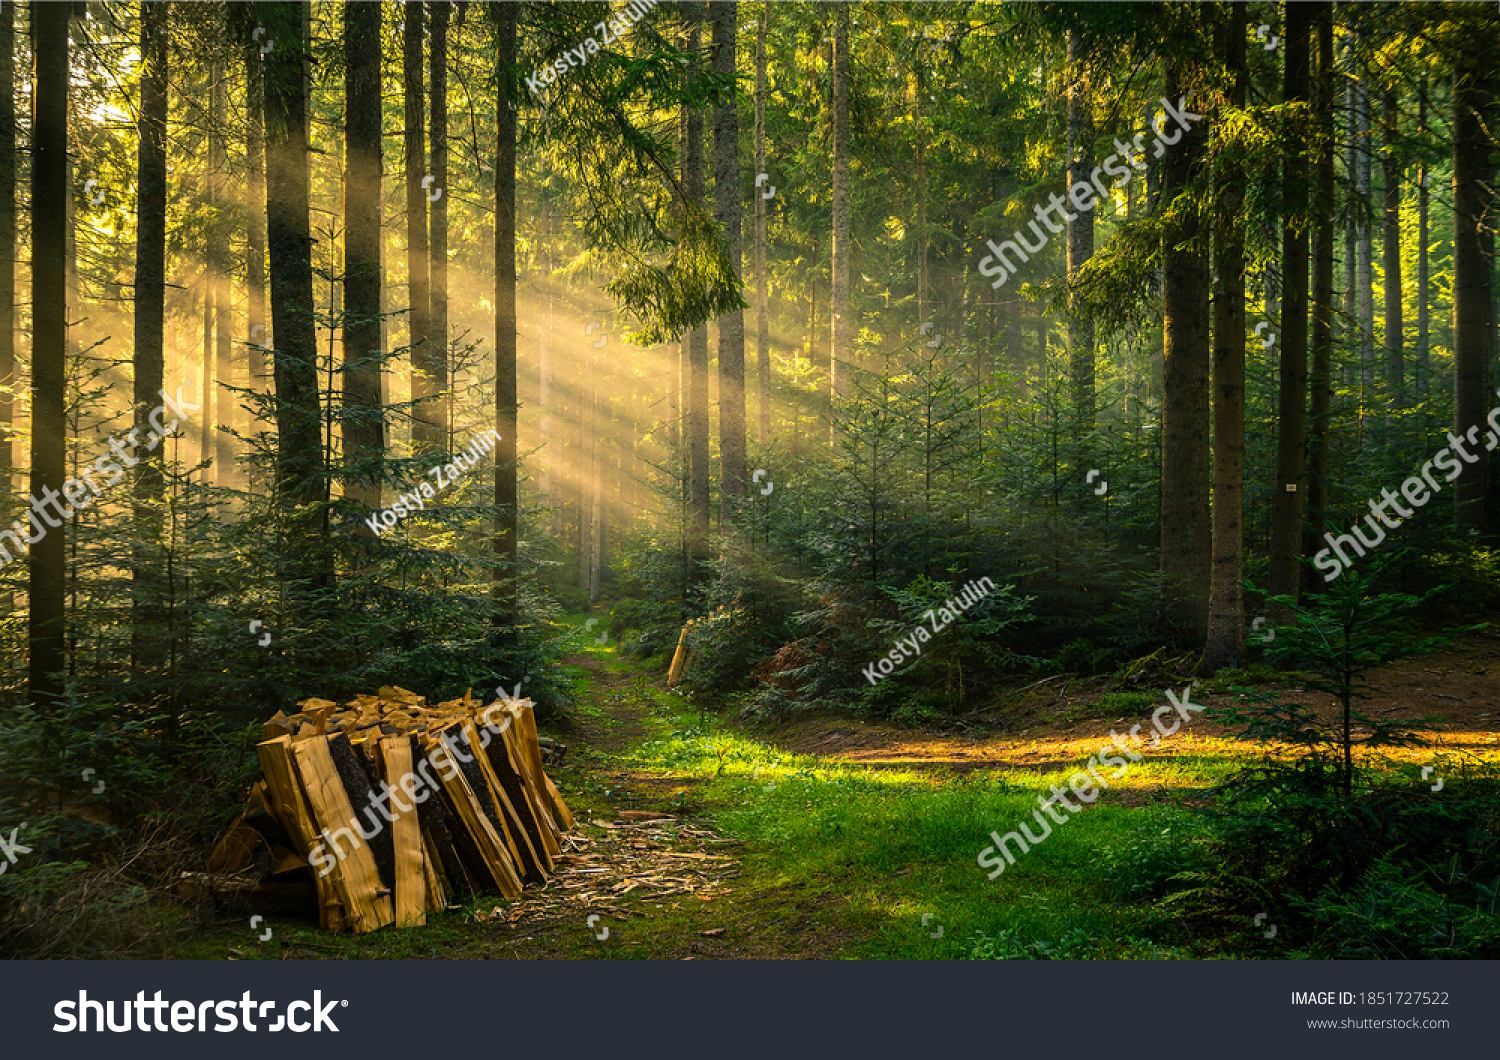 Woodpile trees in magic forrest. Forest sun beam background #1851727522